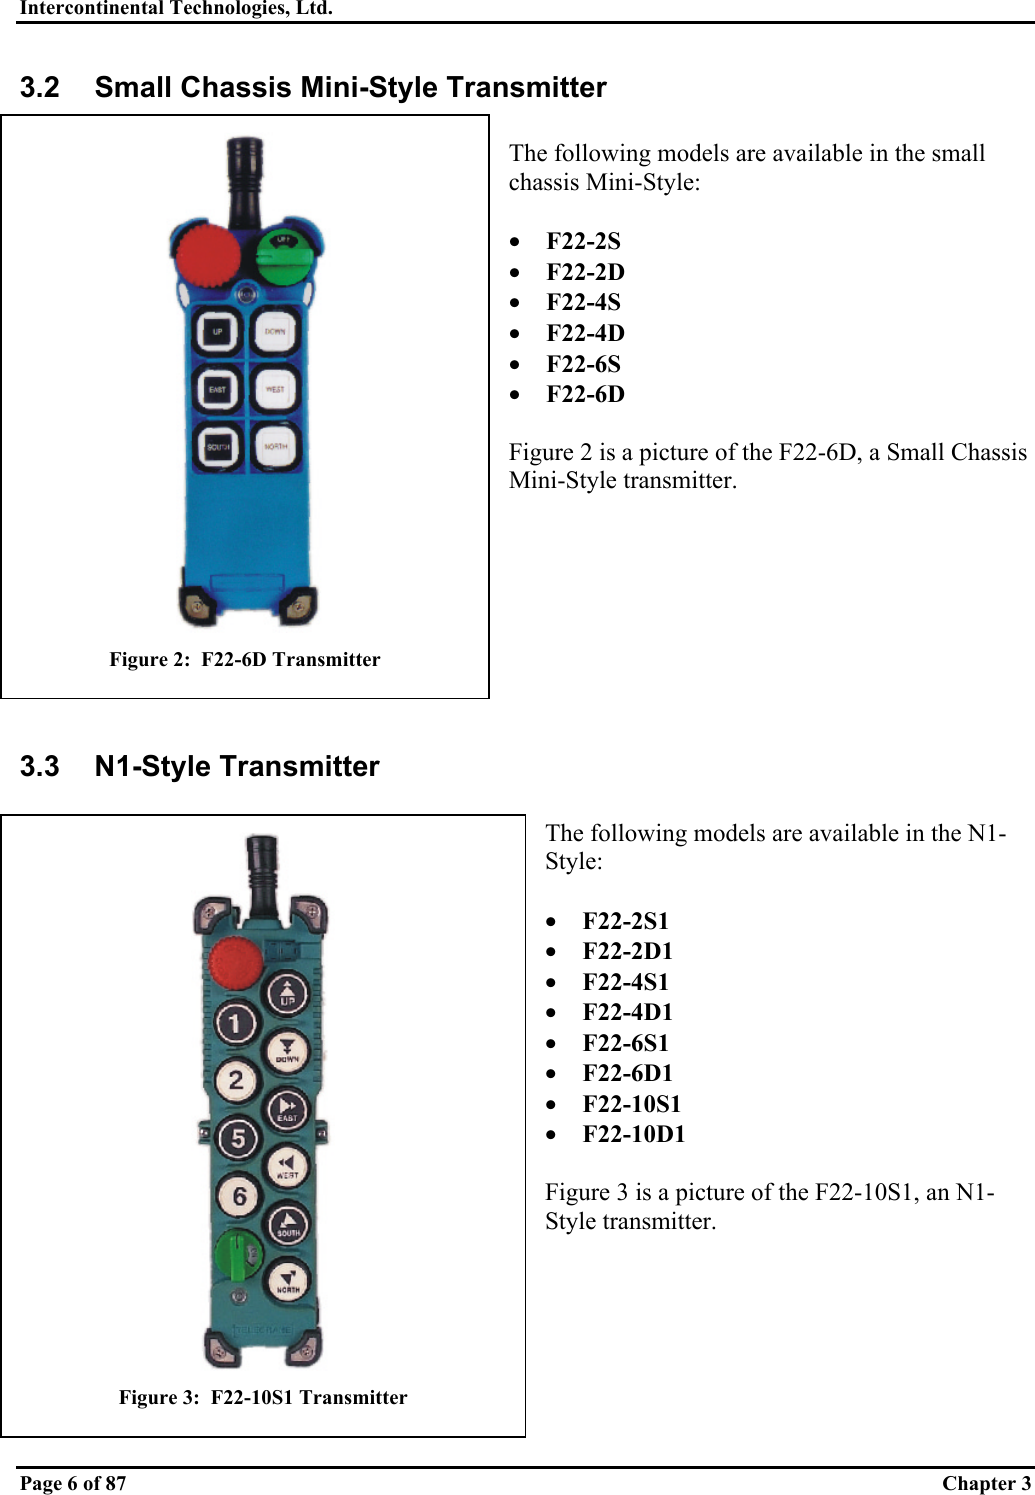 Intercontinental Technologies, Ltd.   Page 6 of 87  Chapter 3 3.2  Small Chassis Mini-Style Transmitter  The following models are available in the small chassis Mini-Style:  •  F22-2S •  F22-2D •  F22-4S •  F22-4D •  F22-6S •  F22-6D  Figure 2 is a picture of the F22-6D, a Small Chassis Mini-Style transmitter.         3.3 N1-Style Transmitter  The following models are available in the N1-Style:  •  F22-2S1 •  F22-2D1 •  F22-4S1 •  F22-4D1 •  F22-6S1 •  F22-6D1 •  F22-10S1 •  F22-10D1  Figure 3 is a picture of the F22-10S1, an N1-Style transmitter.   Figure 2:  F22-6D Transmitter  Figure 3:  F22-10S1 Transmitter 